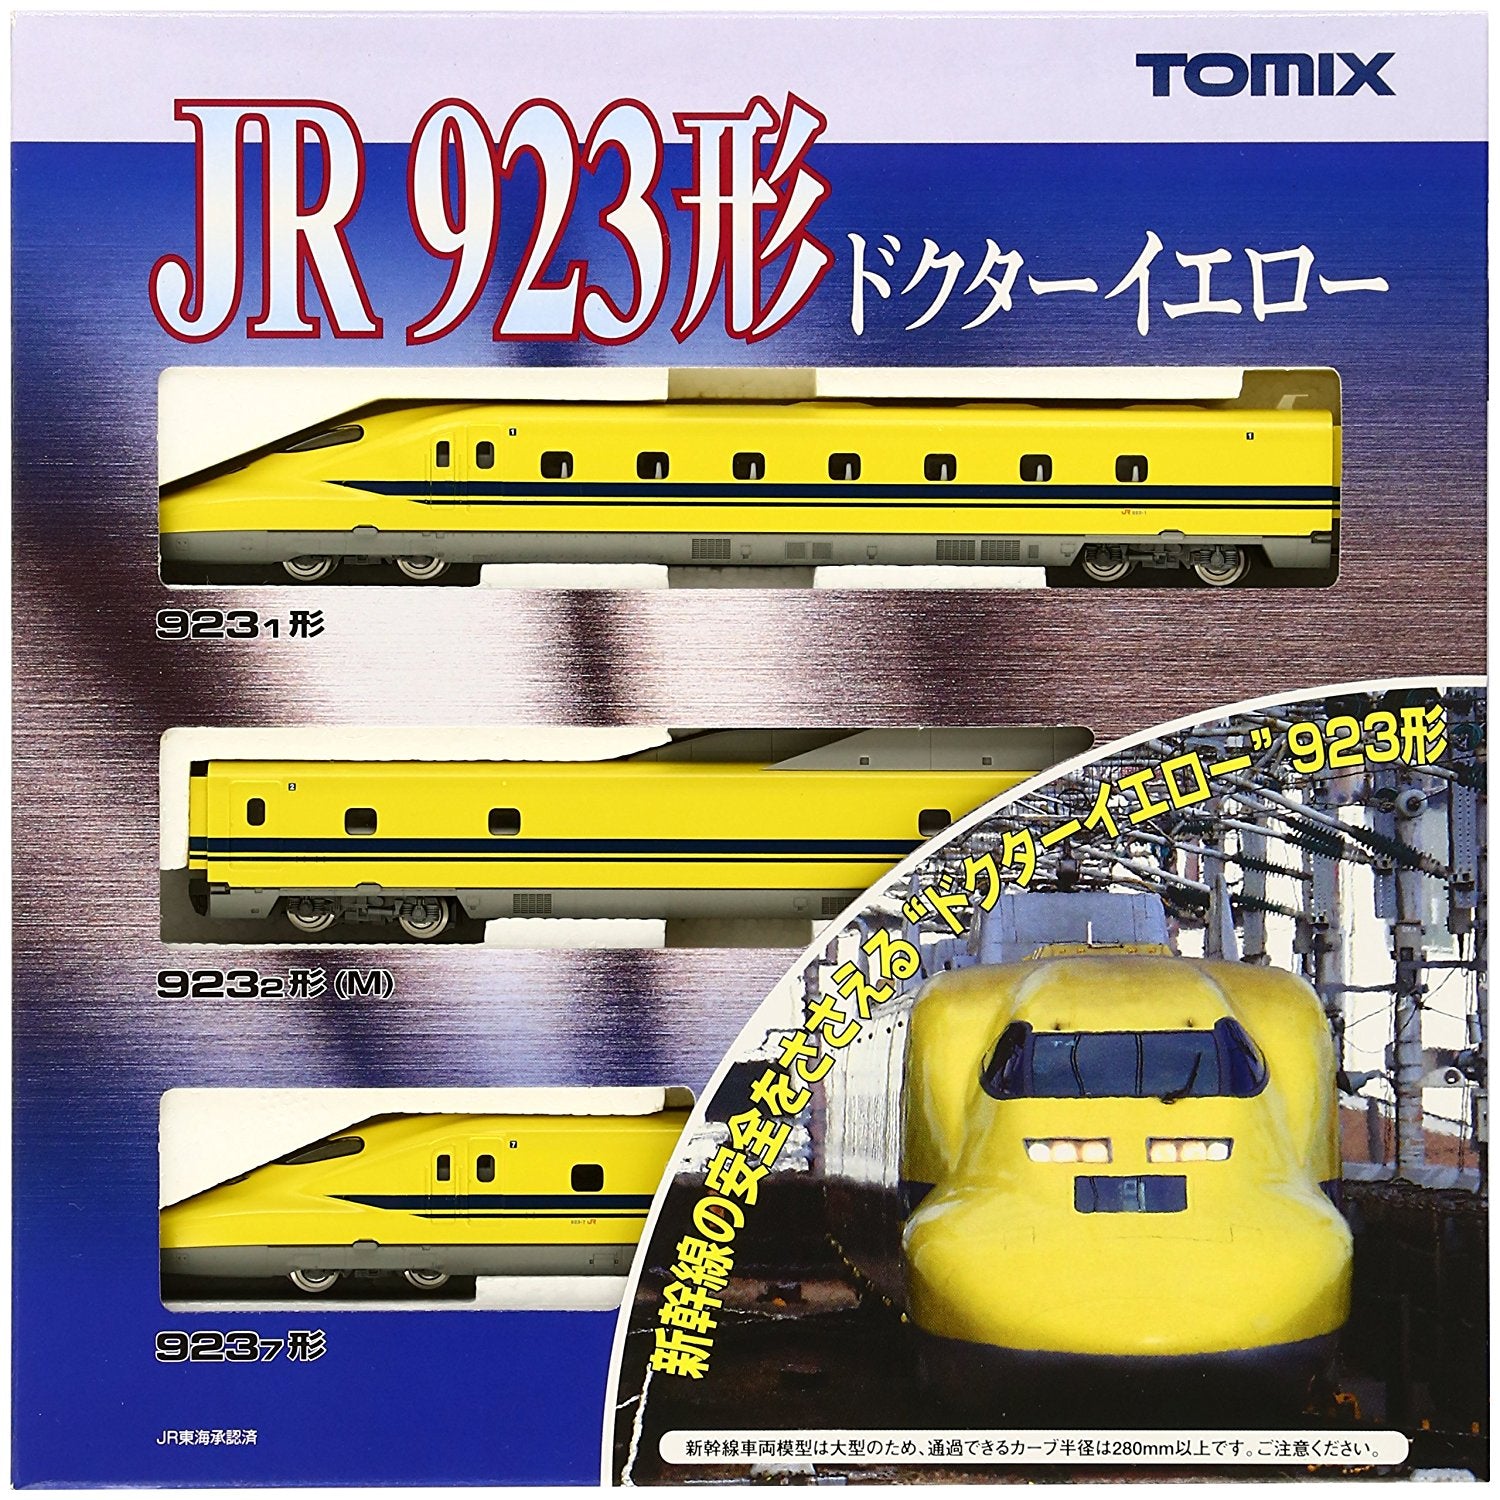 Electricity and Track Inspection Type 923 "Doctor Yellow" 3 car